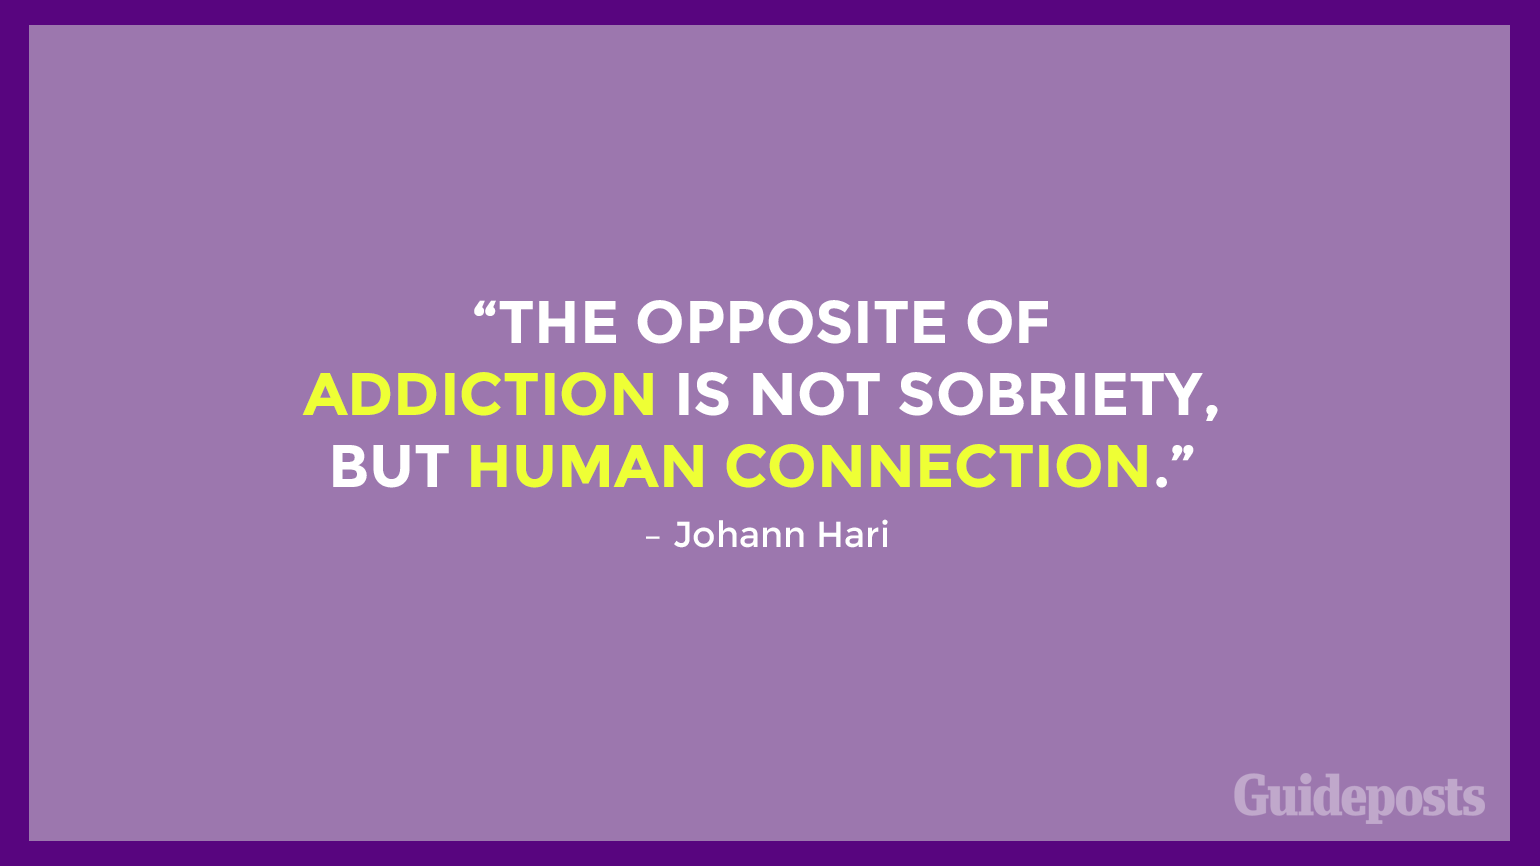 “The opposite of addiction is not sobriety, but human connection.” – Johann Hari